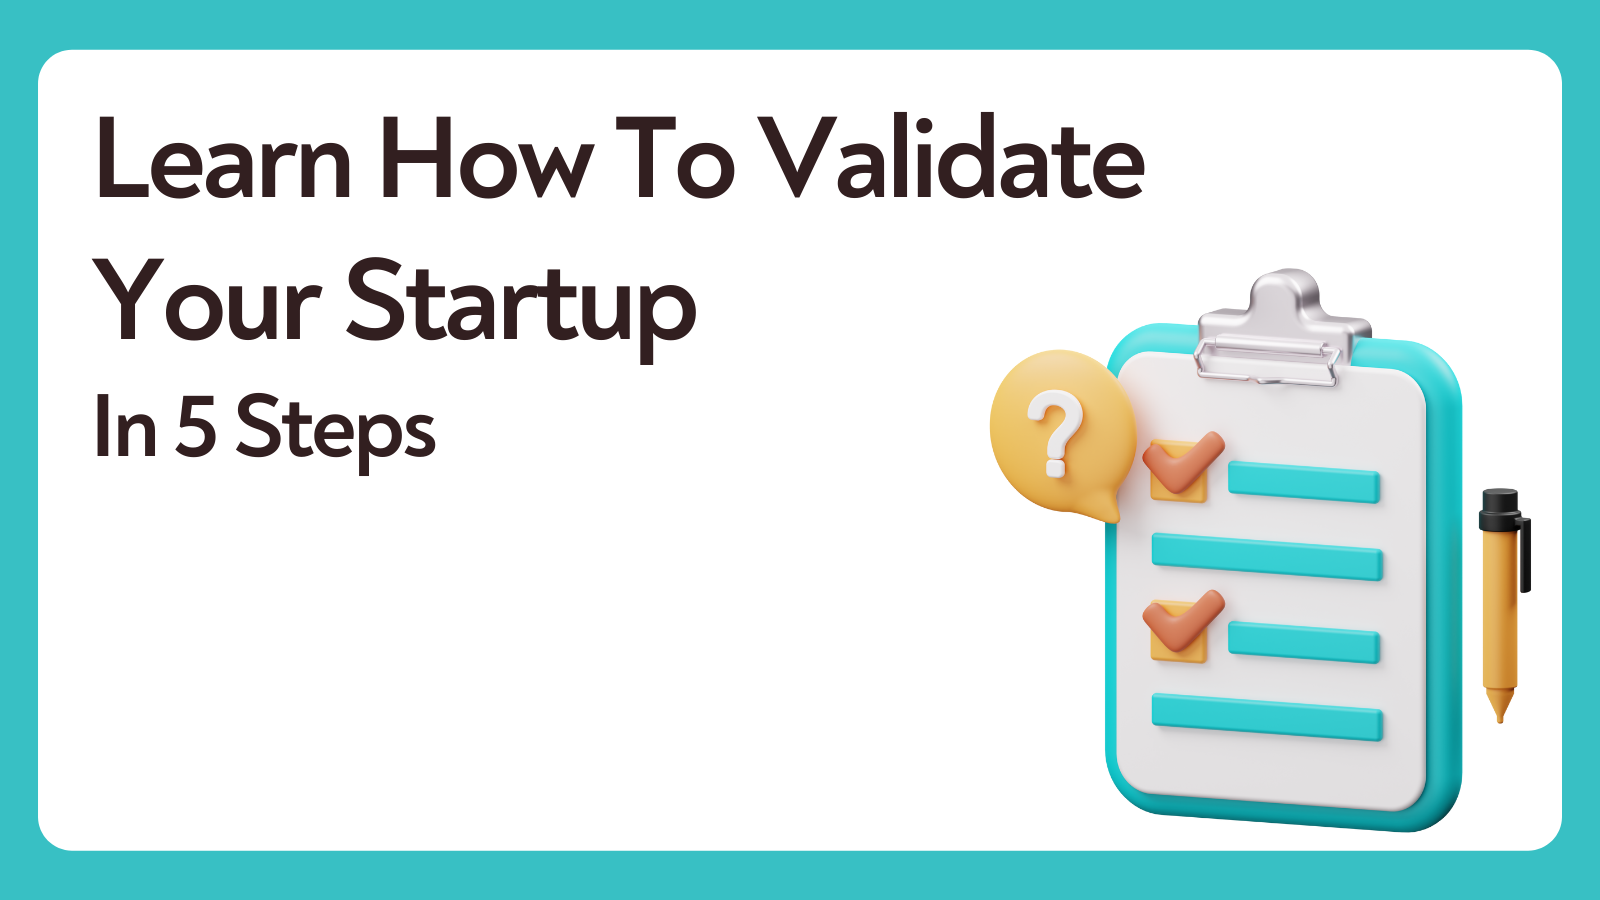 Learn How To Validate Your Startup In 5 Steps